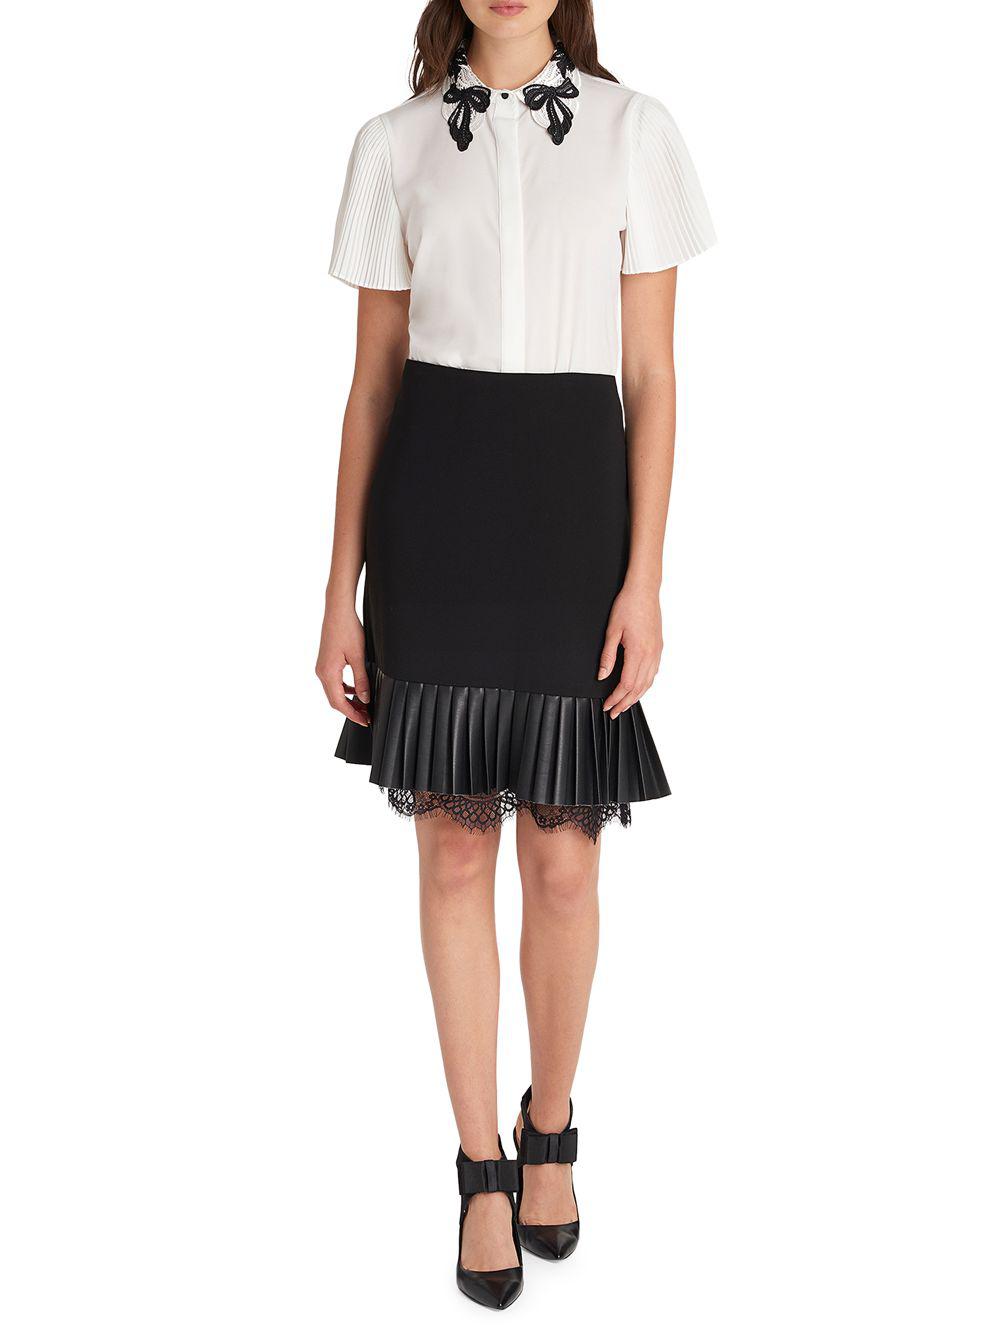 Lyst - Karl Lagerfeld Pleated Skirt With Lace in Black